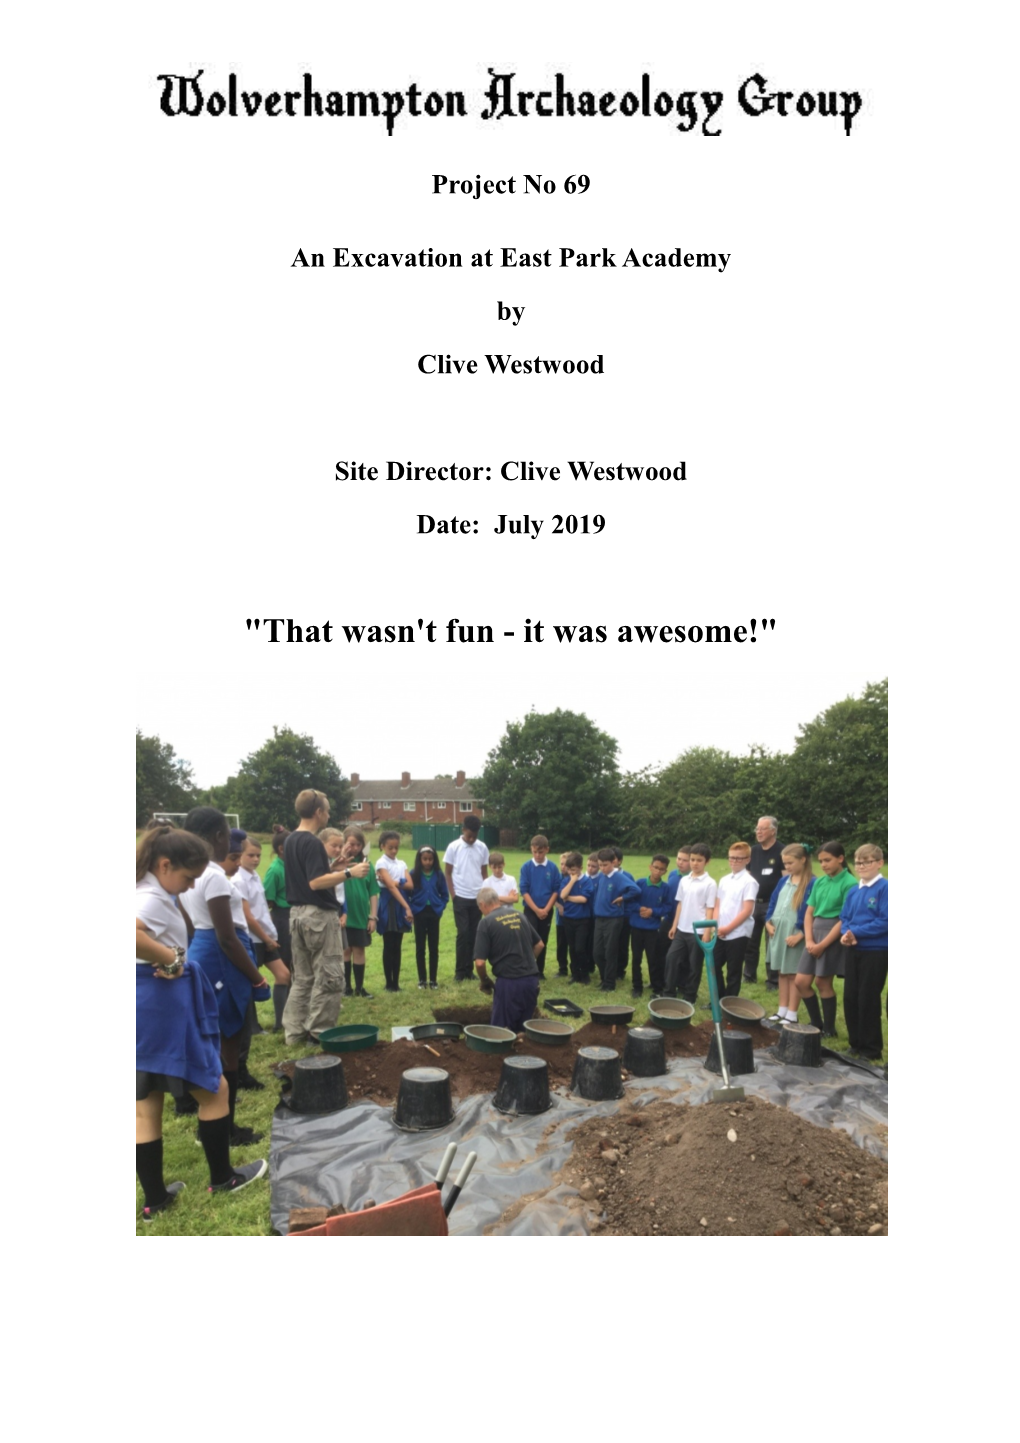 An Excavation at East Park Academy by Clive Westwood